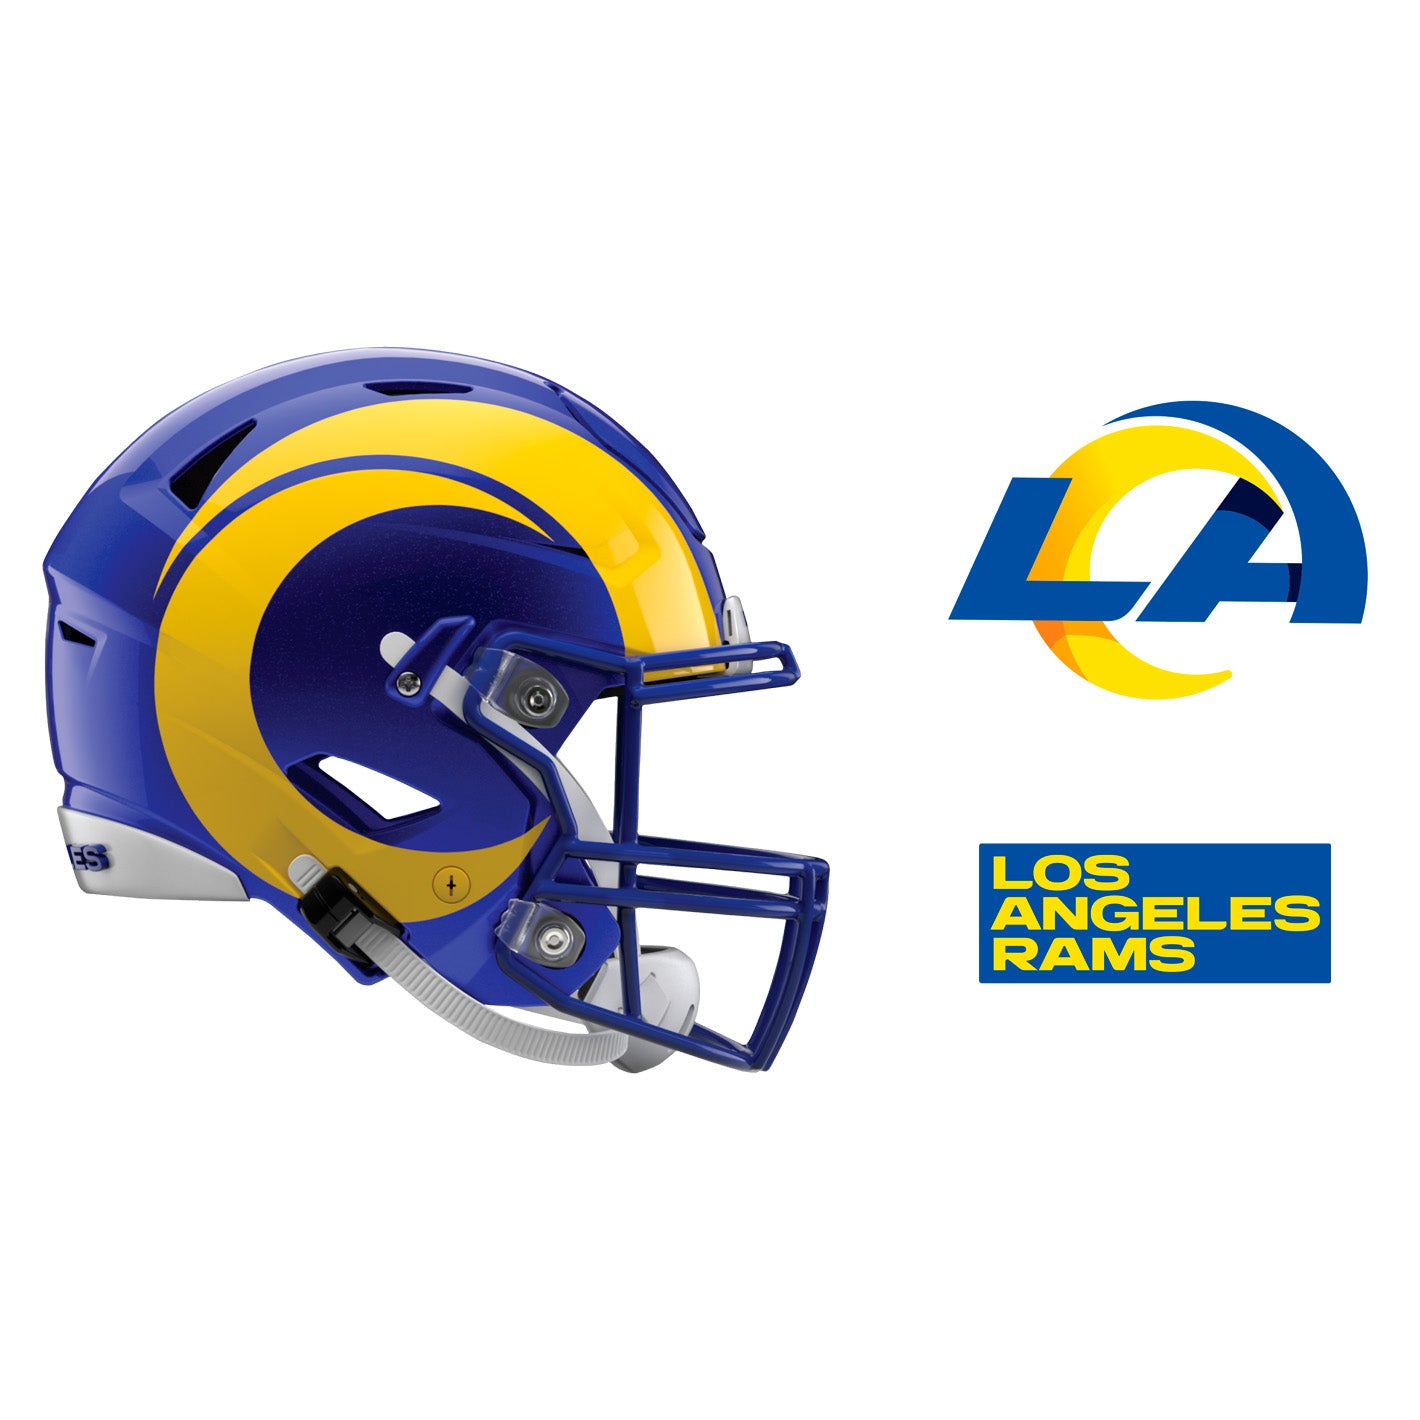 Los Angeles Rams: 2022 Helmet - Officially Licensed NFL Removable